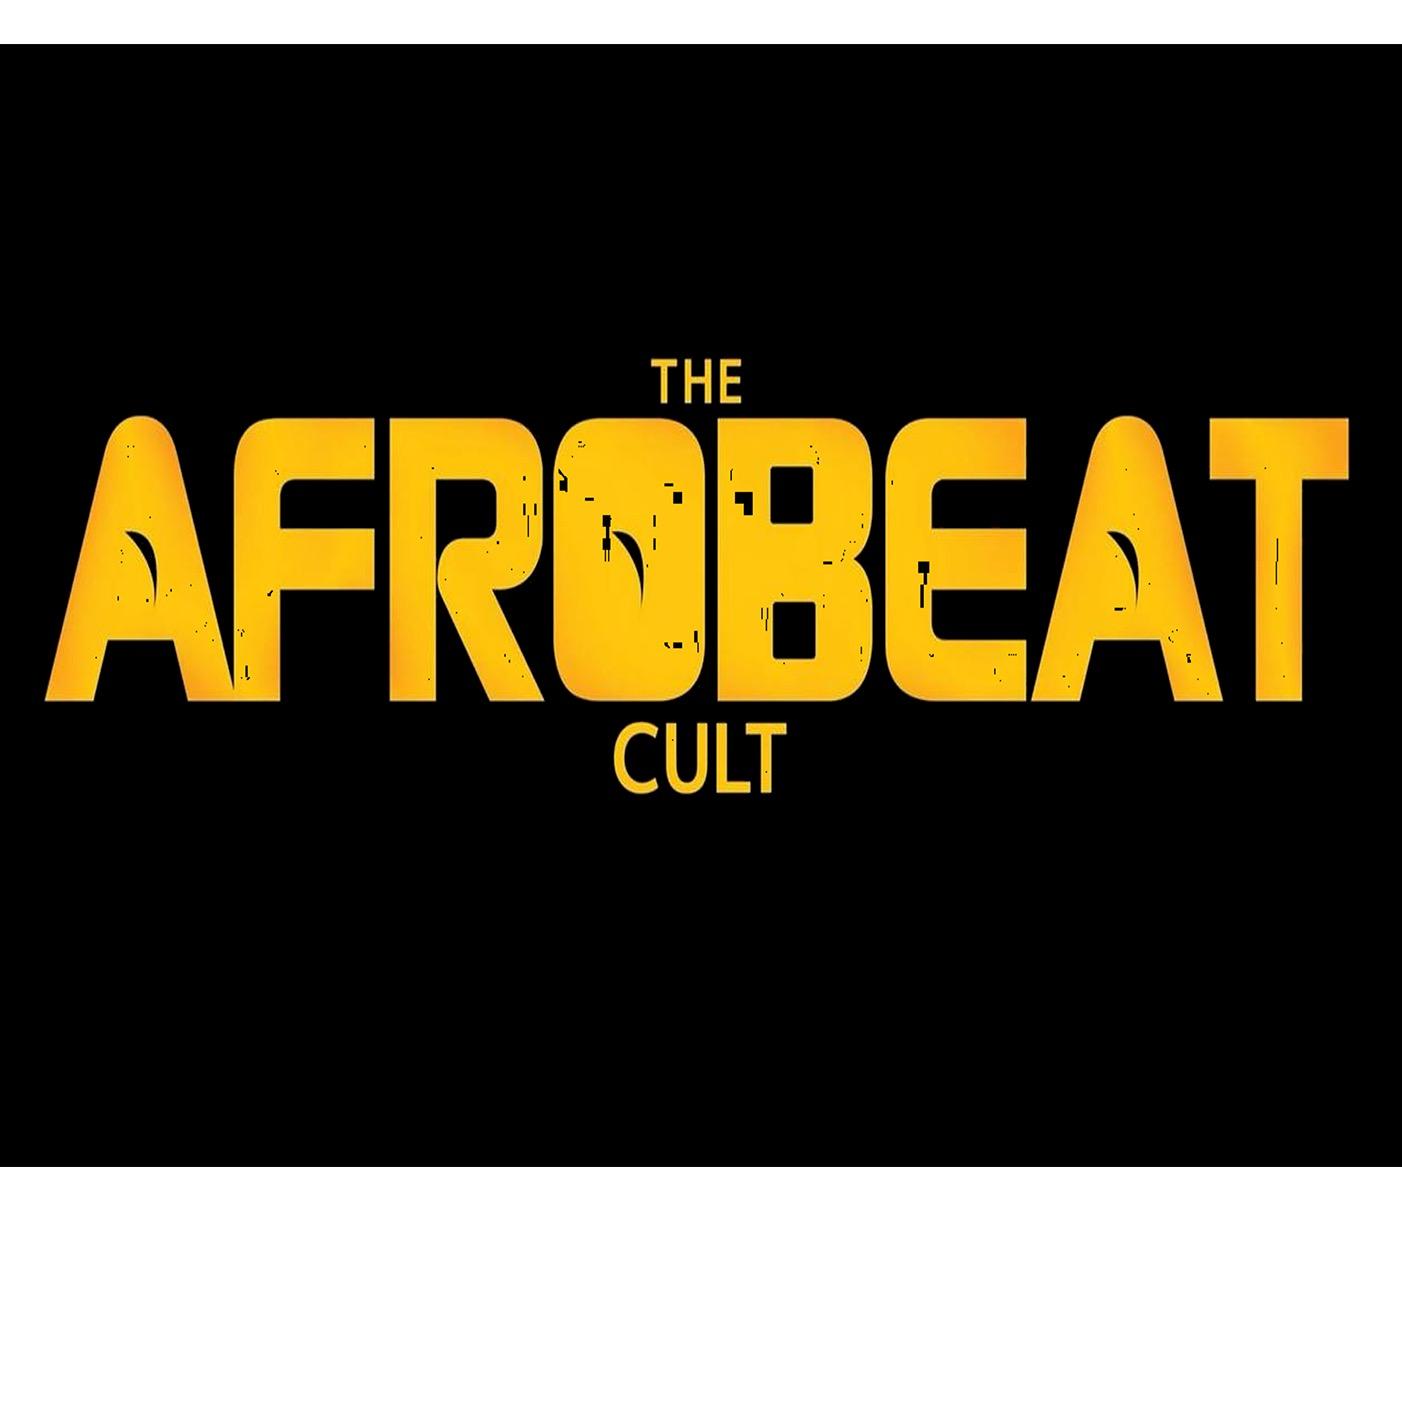 The Afrobeat Cult